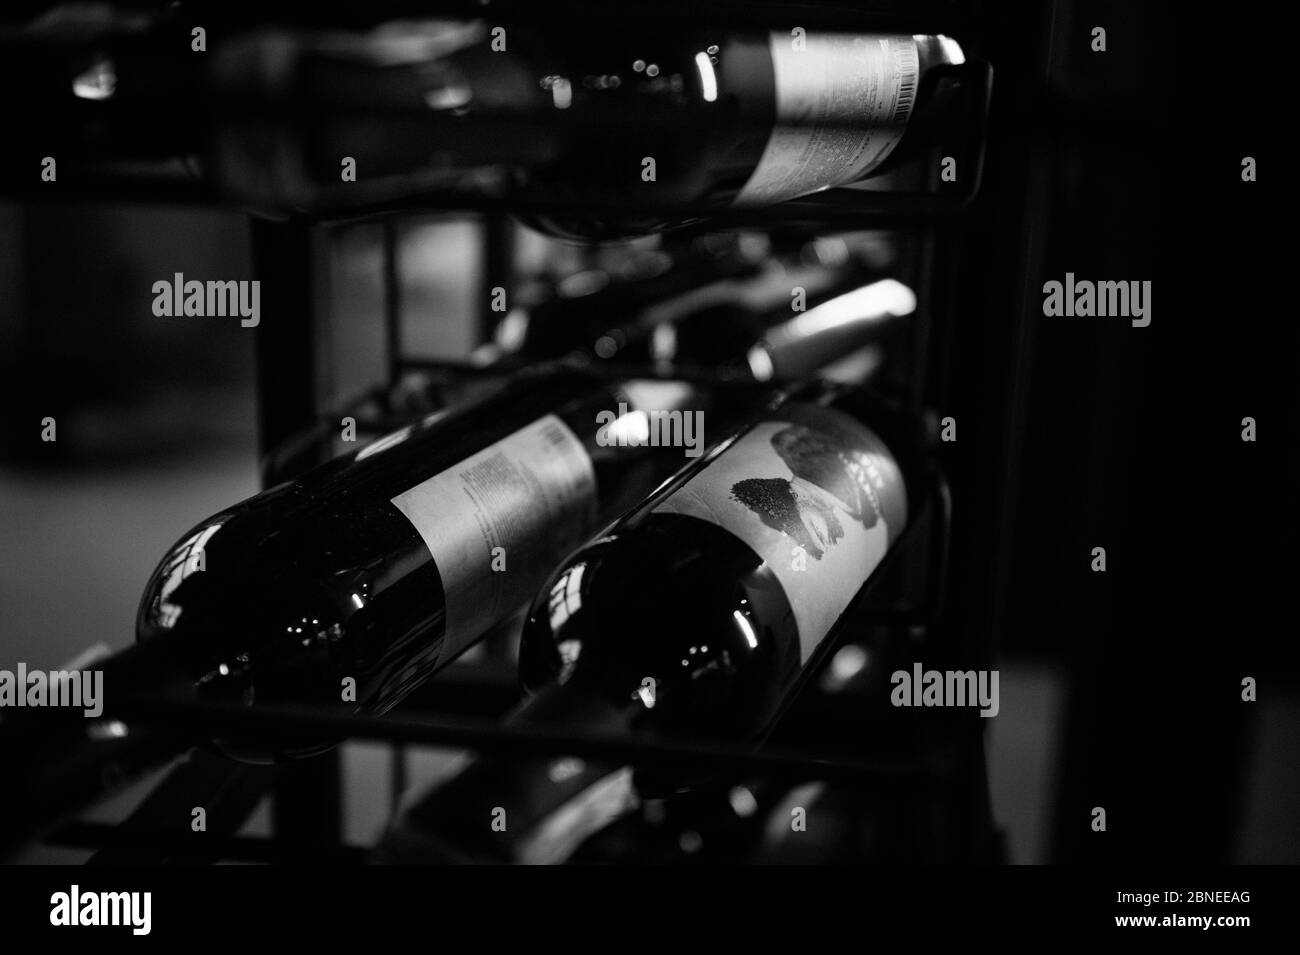 Red wine bottles stacked on wooden racks shot with limited depth of field. Black and white photo. BW photo Stock Photo